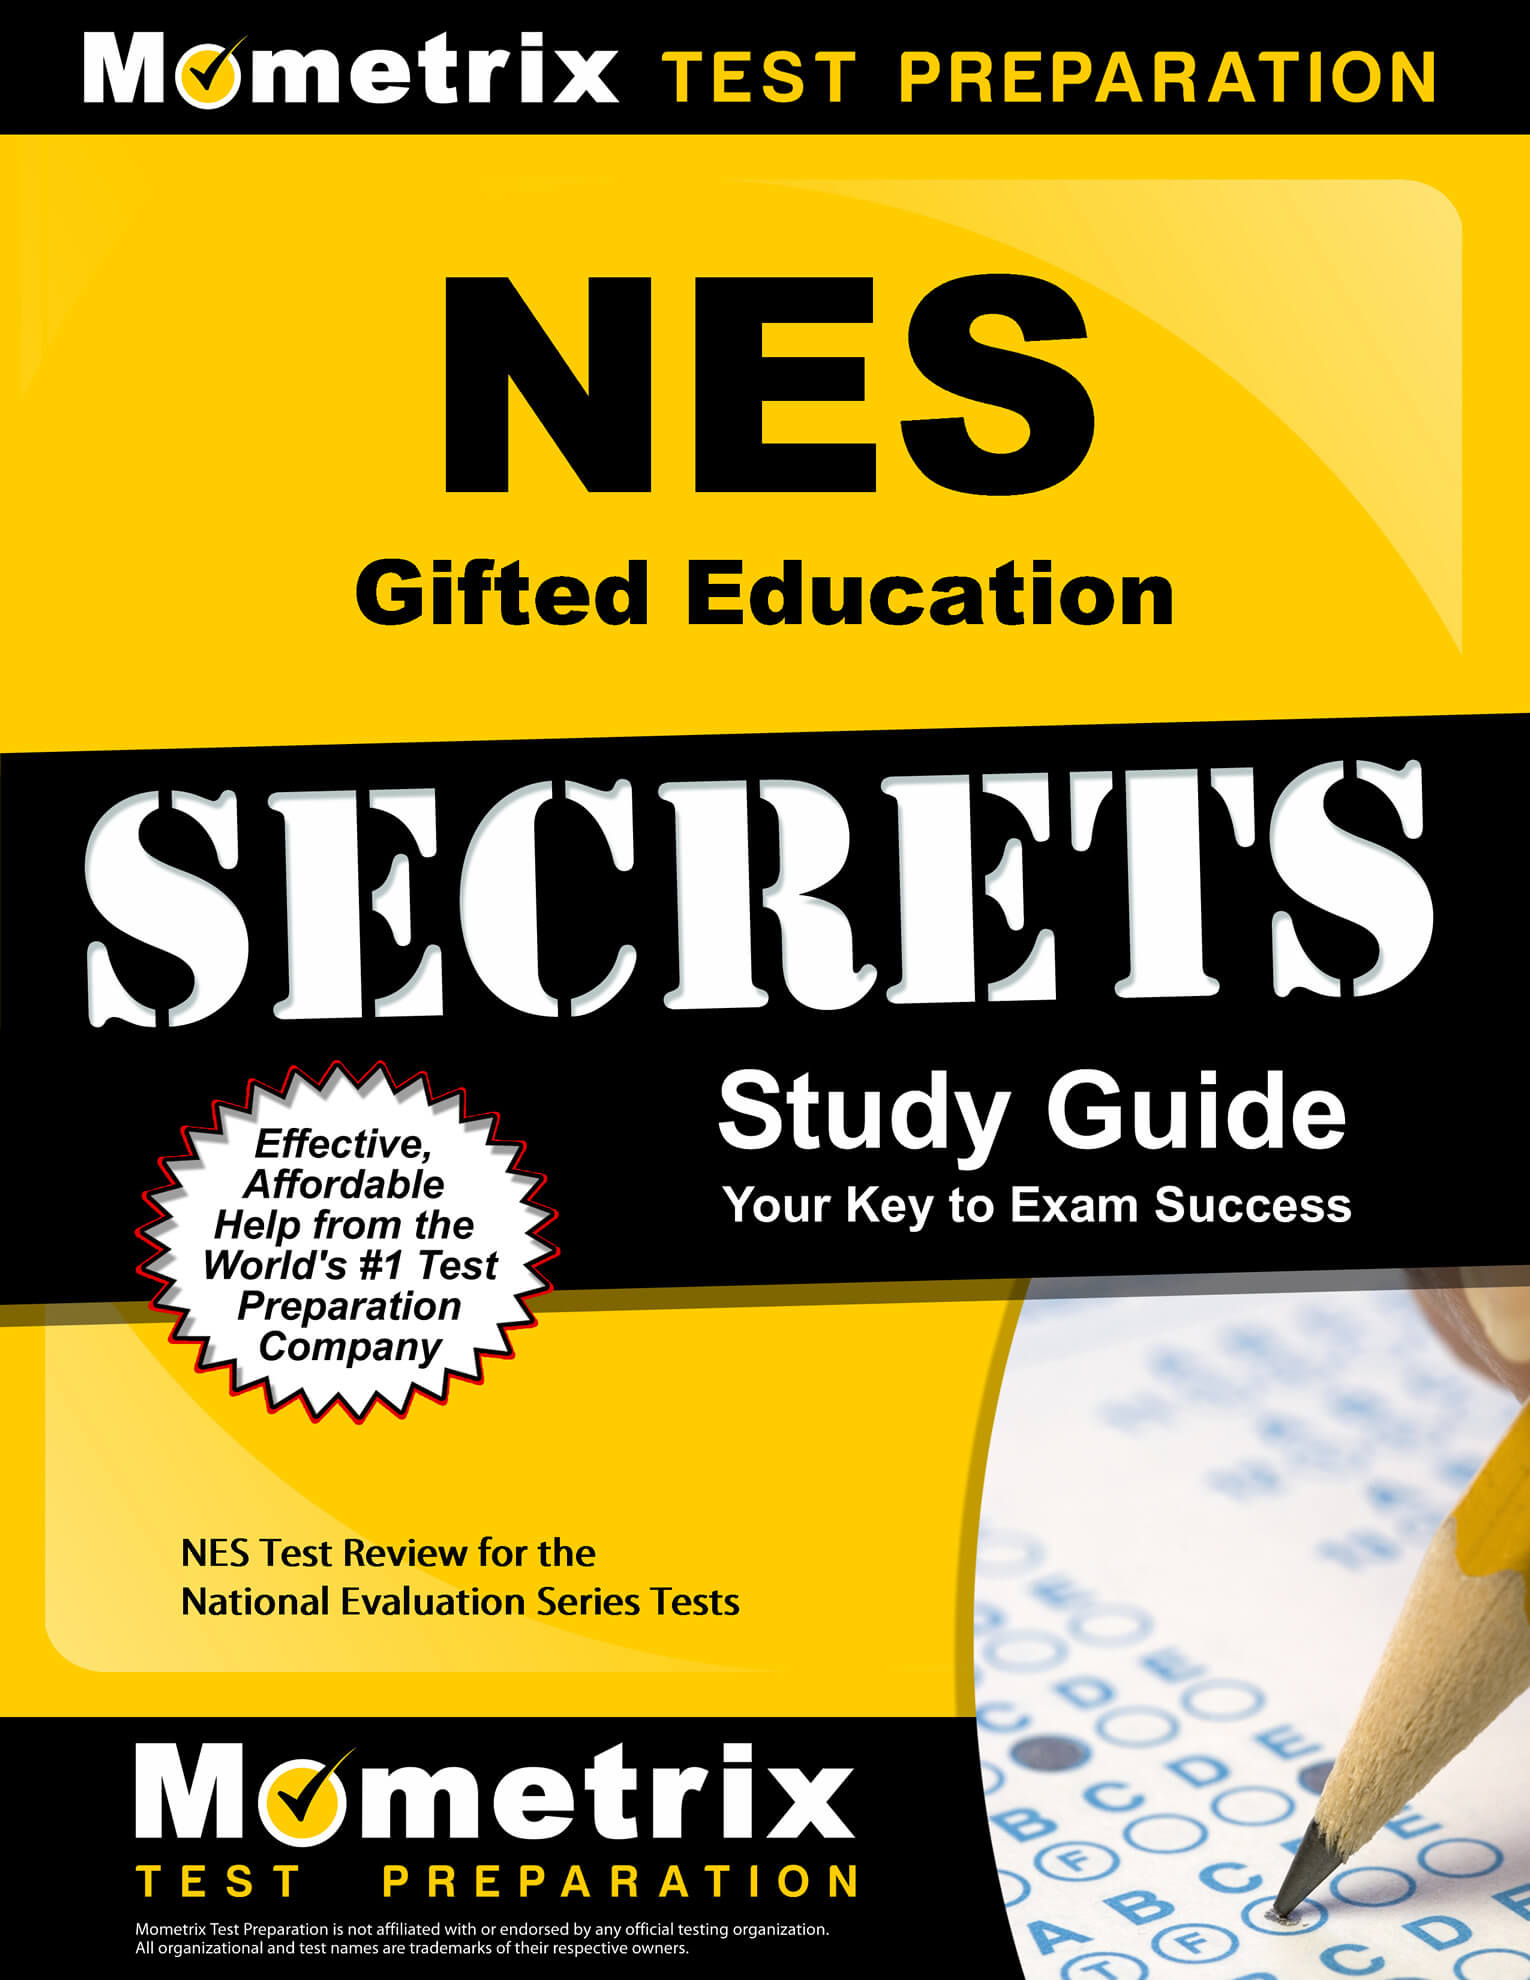 NES Gifted Education Study Guide